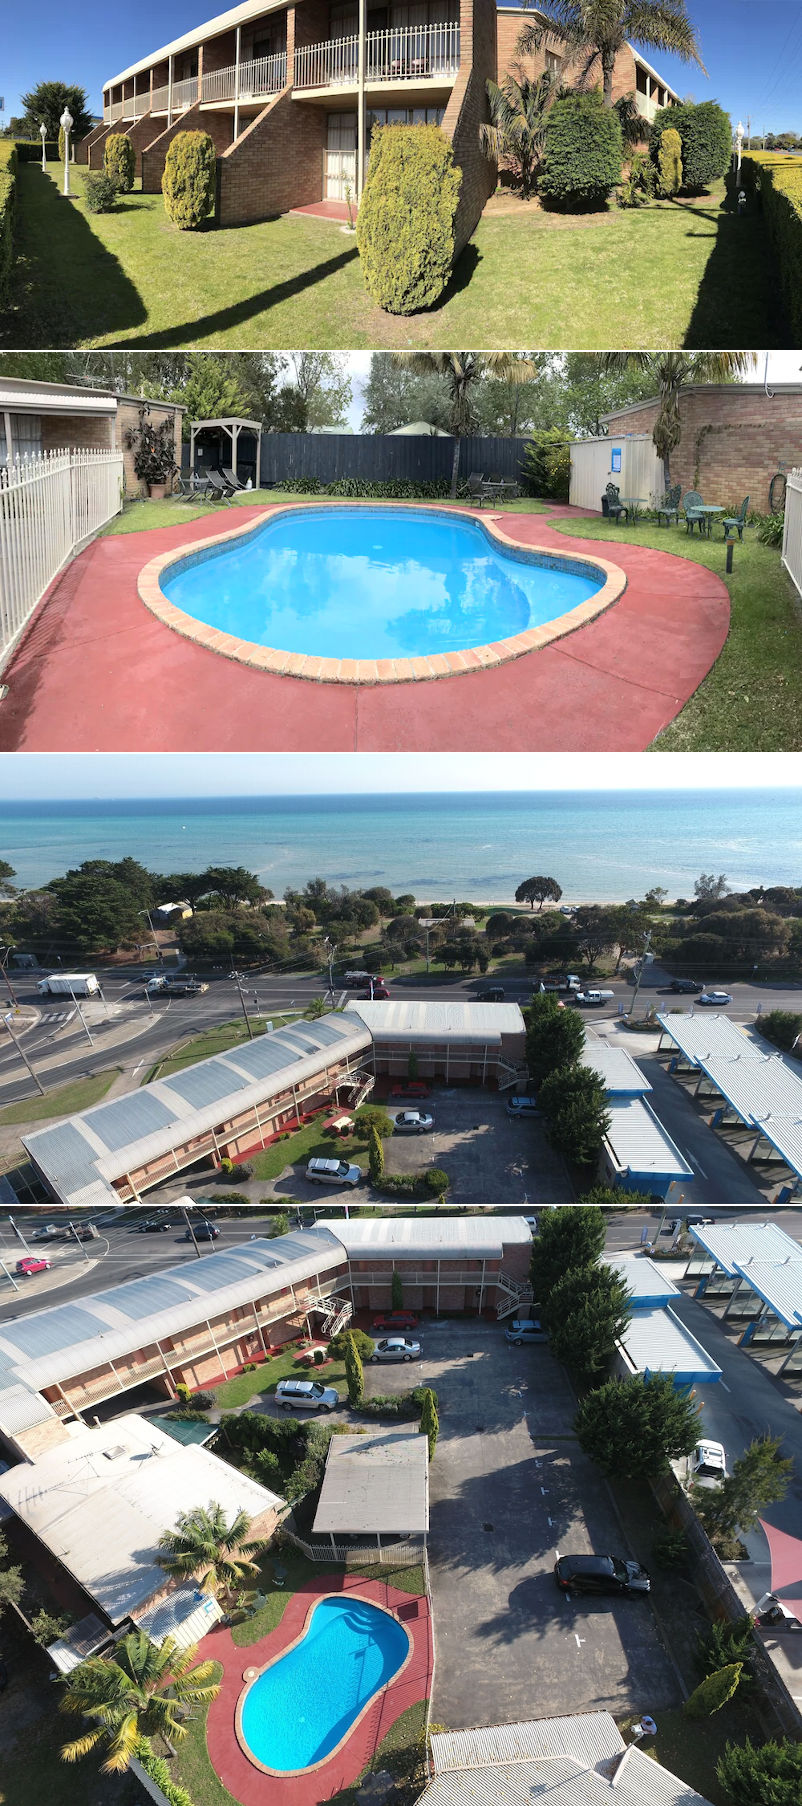 Bayview Motel - Grounds and facilities